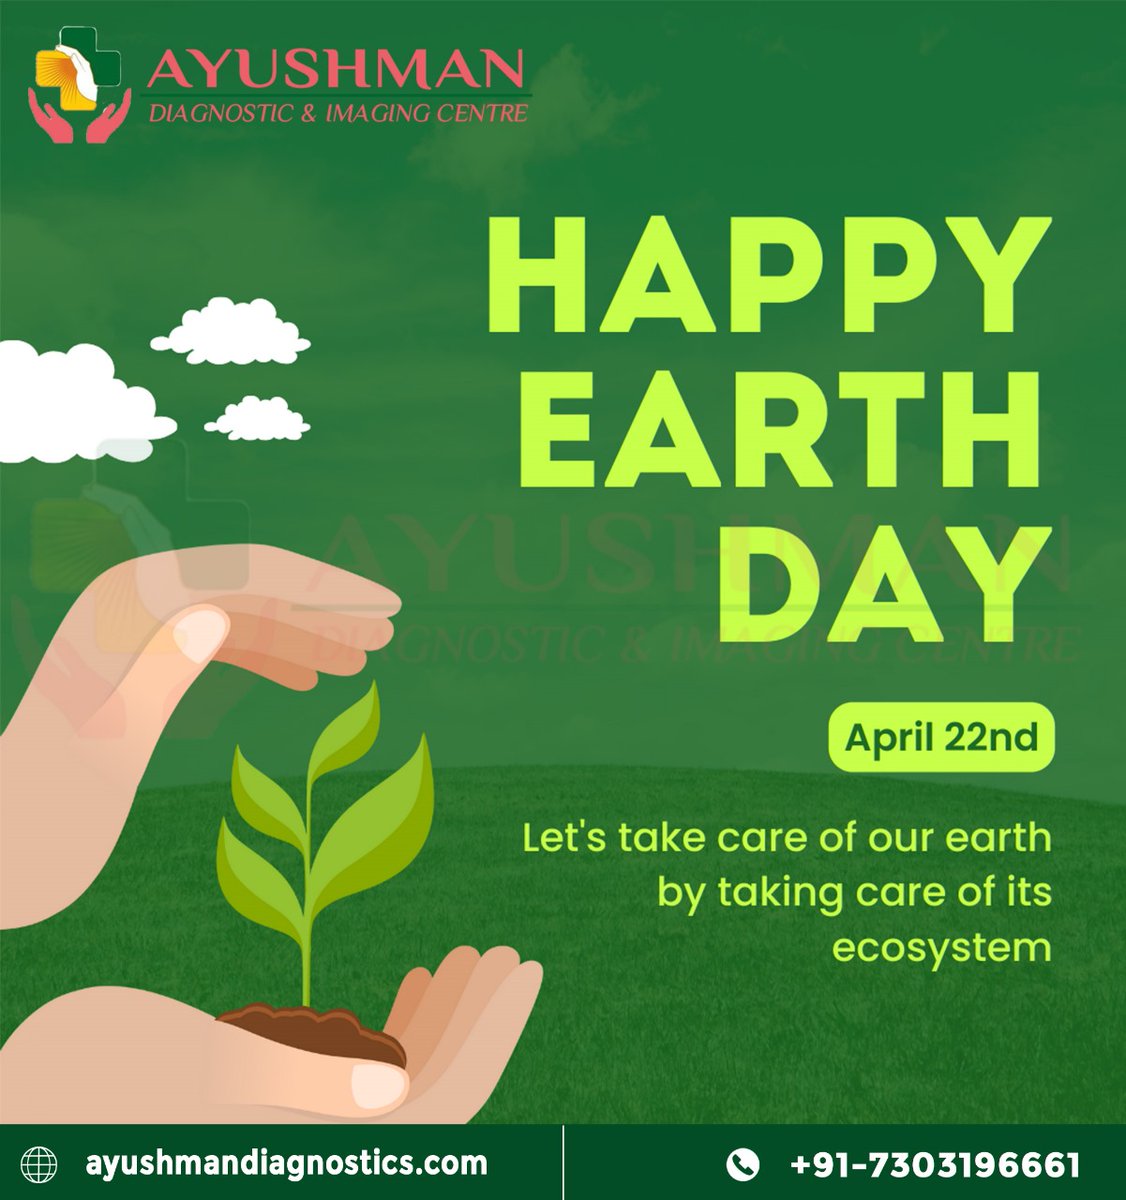 Celebrate Earth Day every day. Make small changes for a big impact.
.
.
.
.
Book your test today!
Call us: +91 73031 96661
Visit: ayushmandiagnostics.com
#worldearthday #happy #earth #day #earthday2024 #savetheearth #earthpic #stoppollution #delhi #ayushmancentreofexcellence